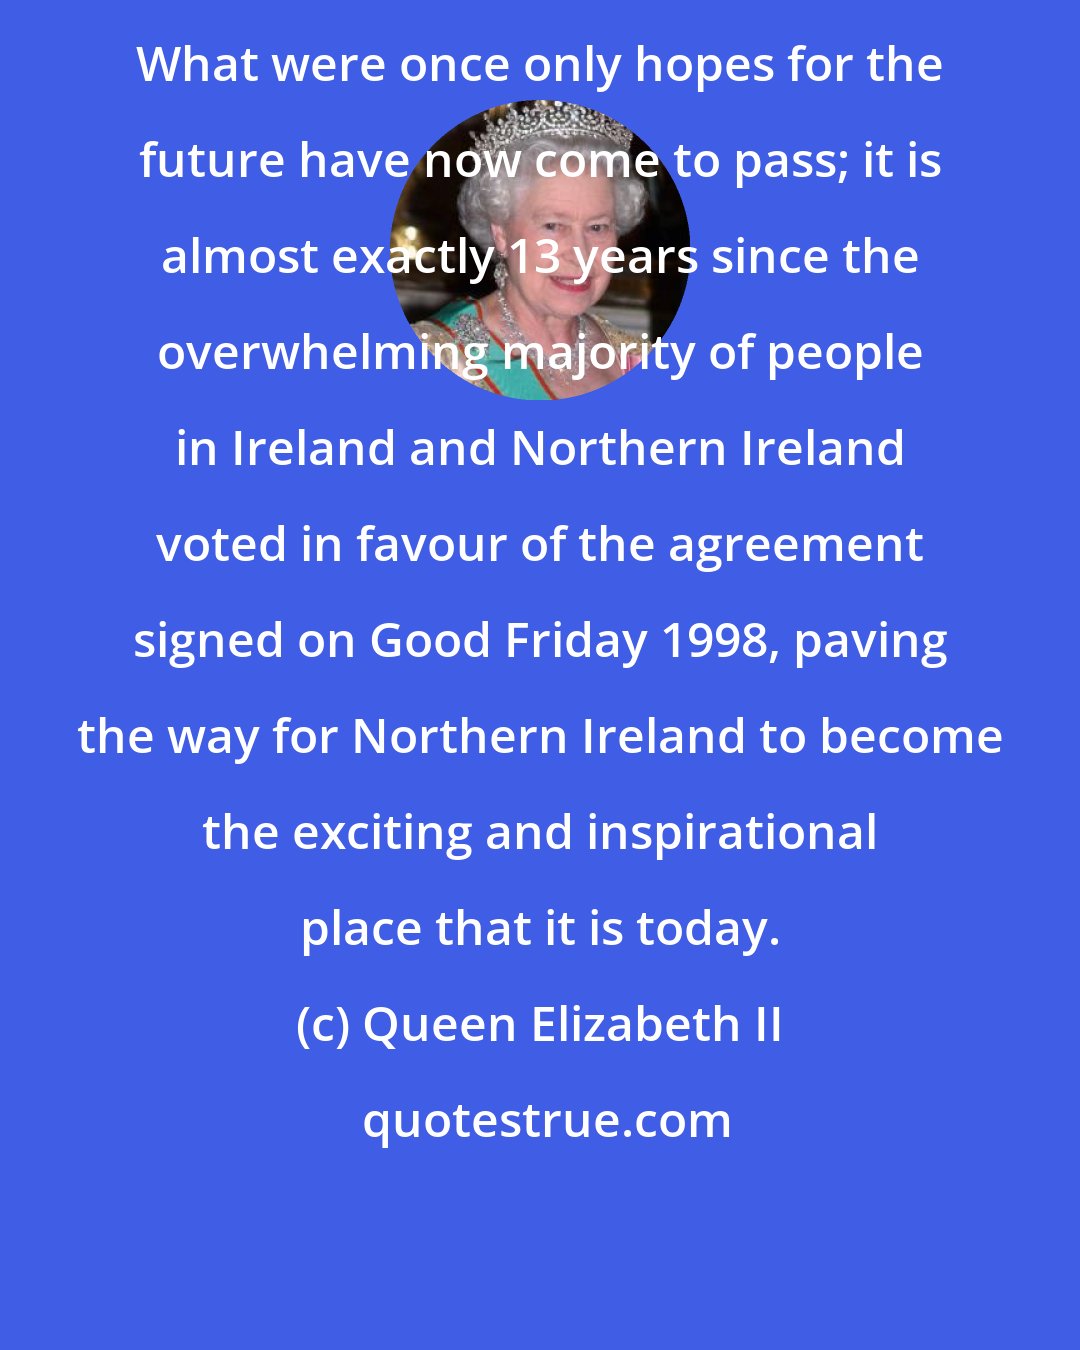 Queen Elizabeth II: What were once only hopes for the future have now come to pass; it is almost exactly 13 years since the overwhelming majority of people in Ireland and Northern Ireland voted in favour of the agreement signed on Good Friday 1998, paving the way for Northern Ireland to become the exciting and inspirational place that it is today.